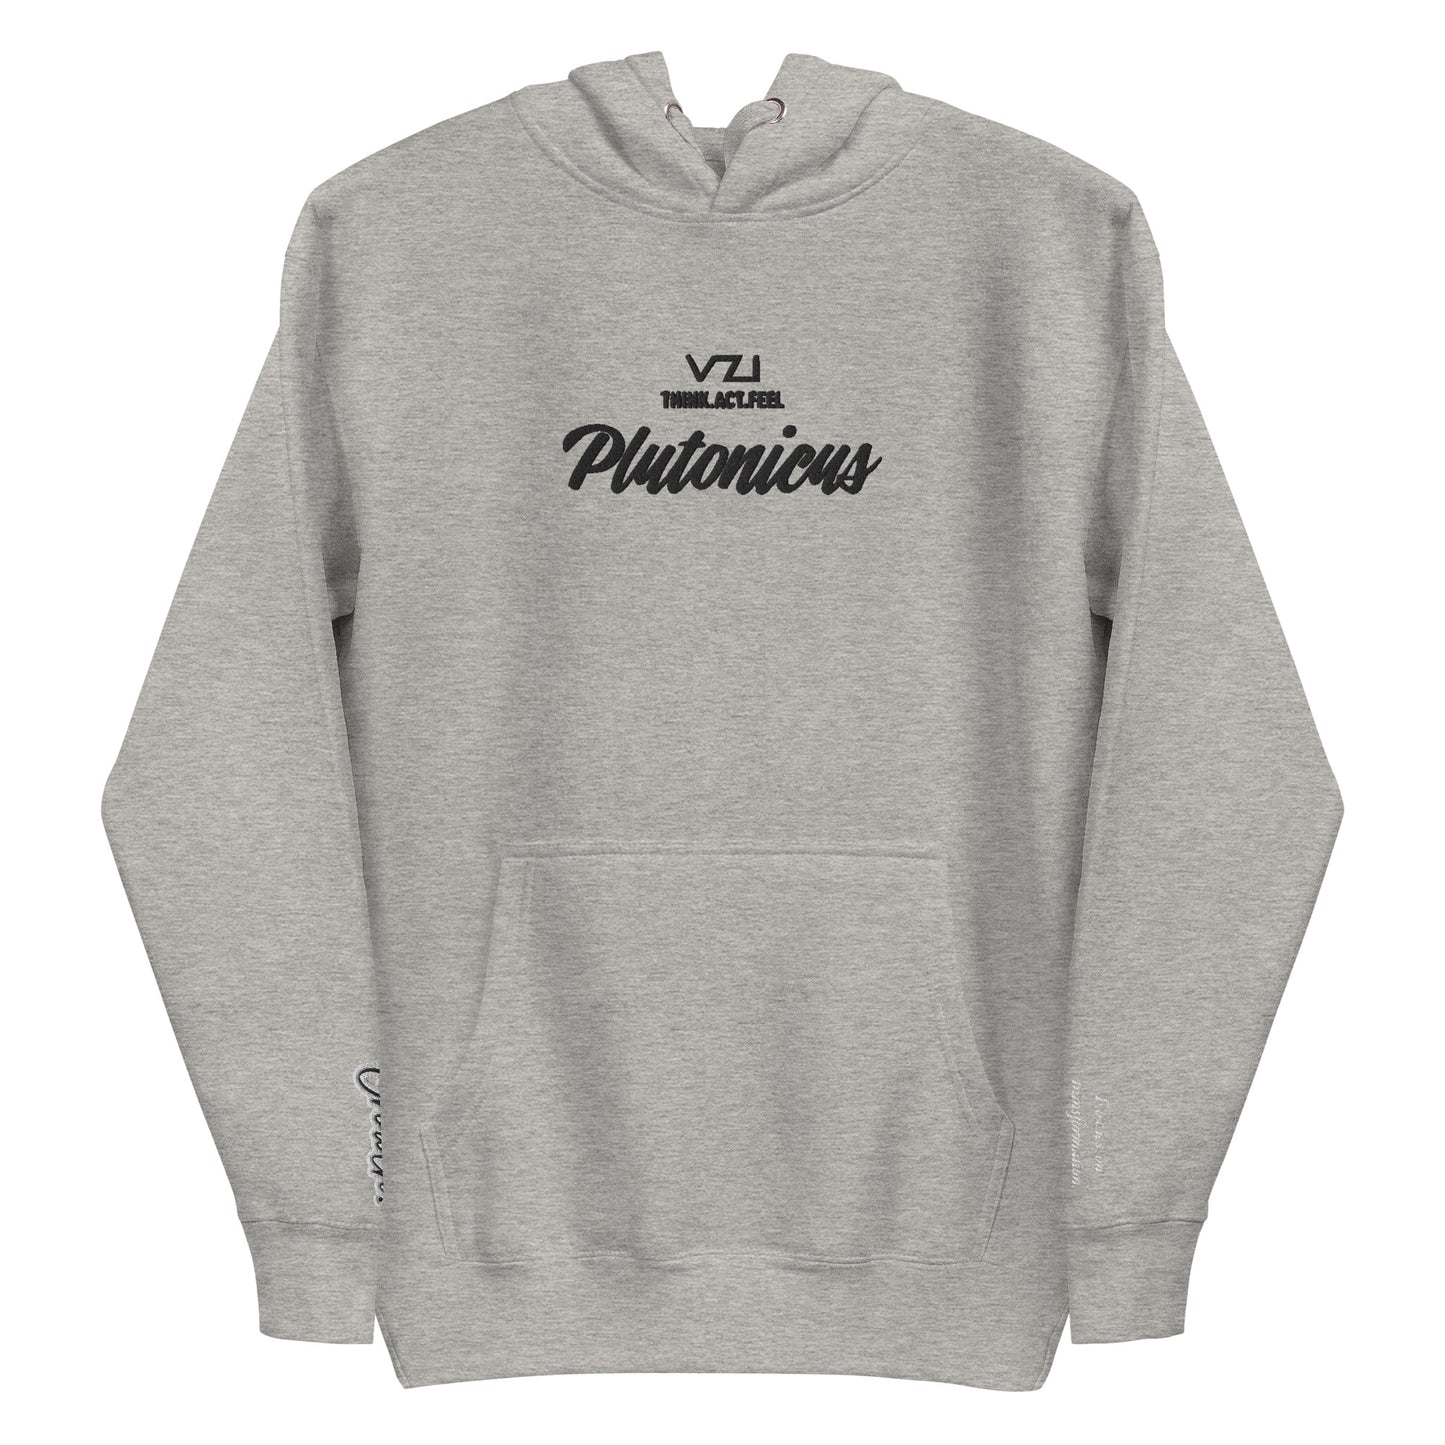 Plutonicus: Men's Hoodie, Classic Cotton: Focus on transformation, rebirth, and deep change.(Growth)